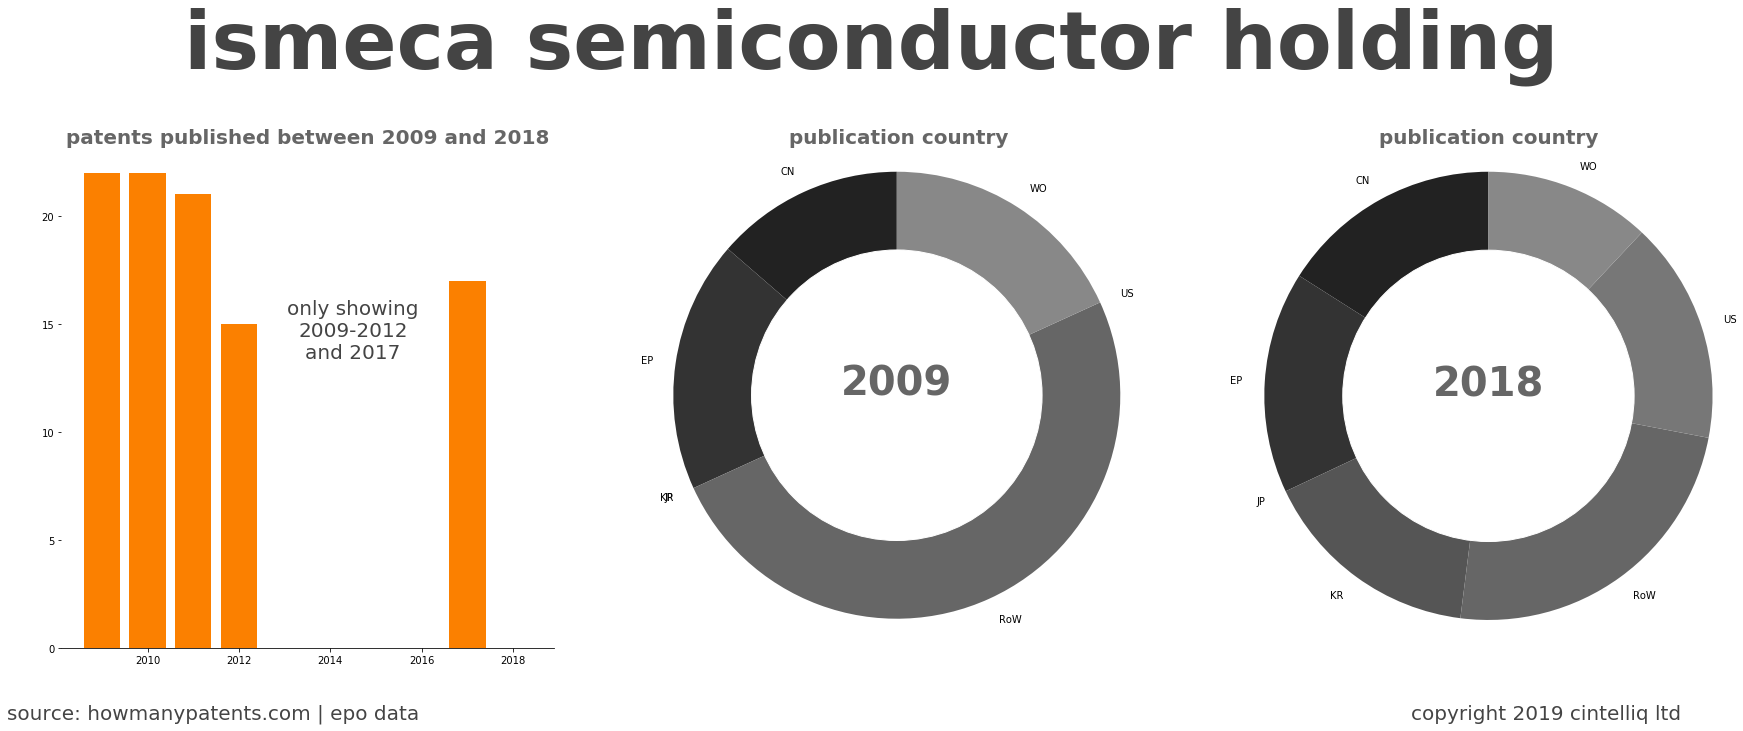 summary of patents for Ismeca Semiconductor Holding